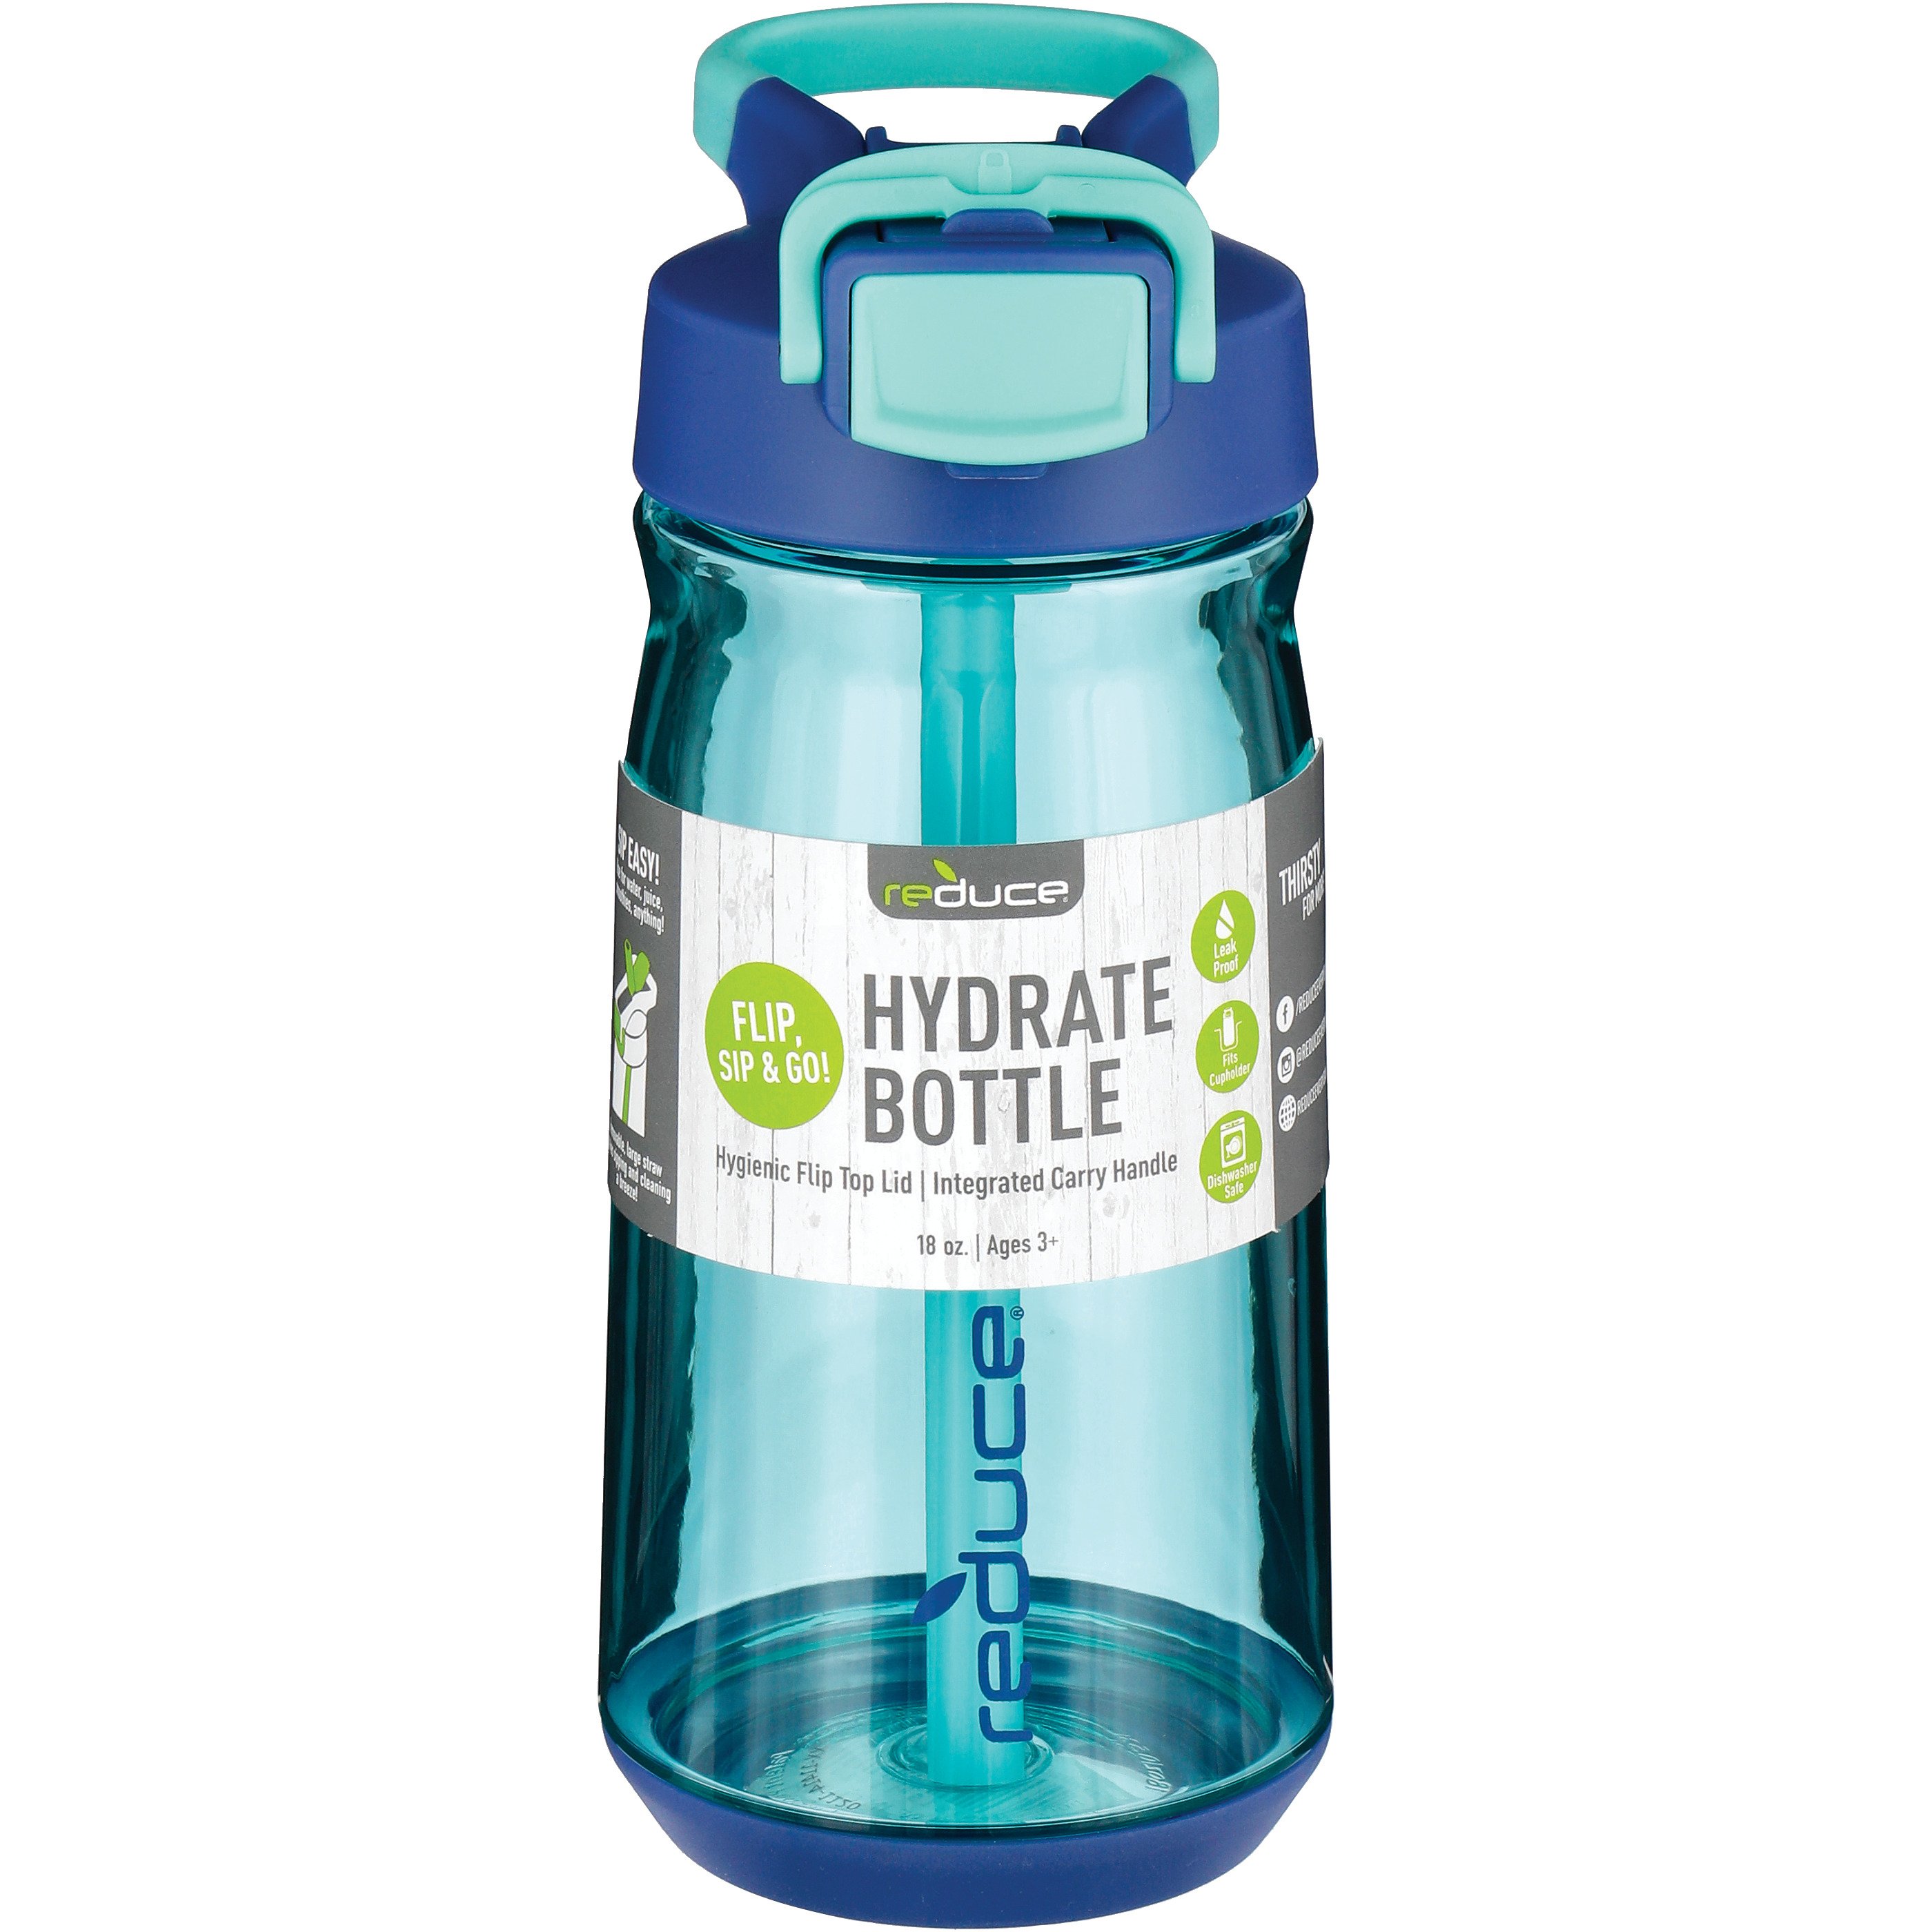 Reduce Water Bottle Sip and Go Hydrate Bottle For Kids Tritan Plastic With Hygienic Flip Top Lid and Carry Handle Leak Proof Flip 18 oz Morning Rays Cupholder Friendly